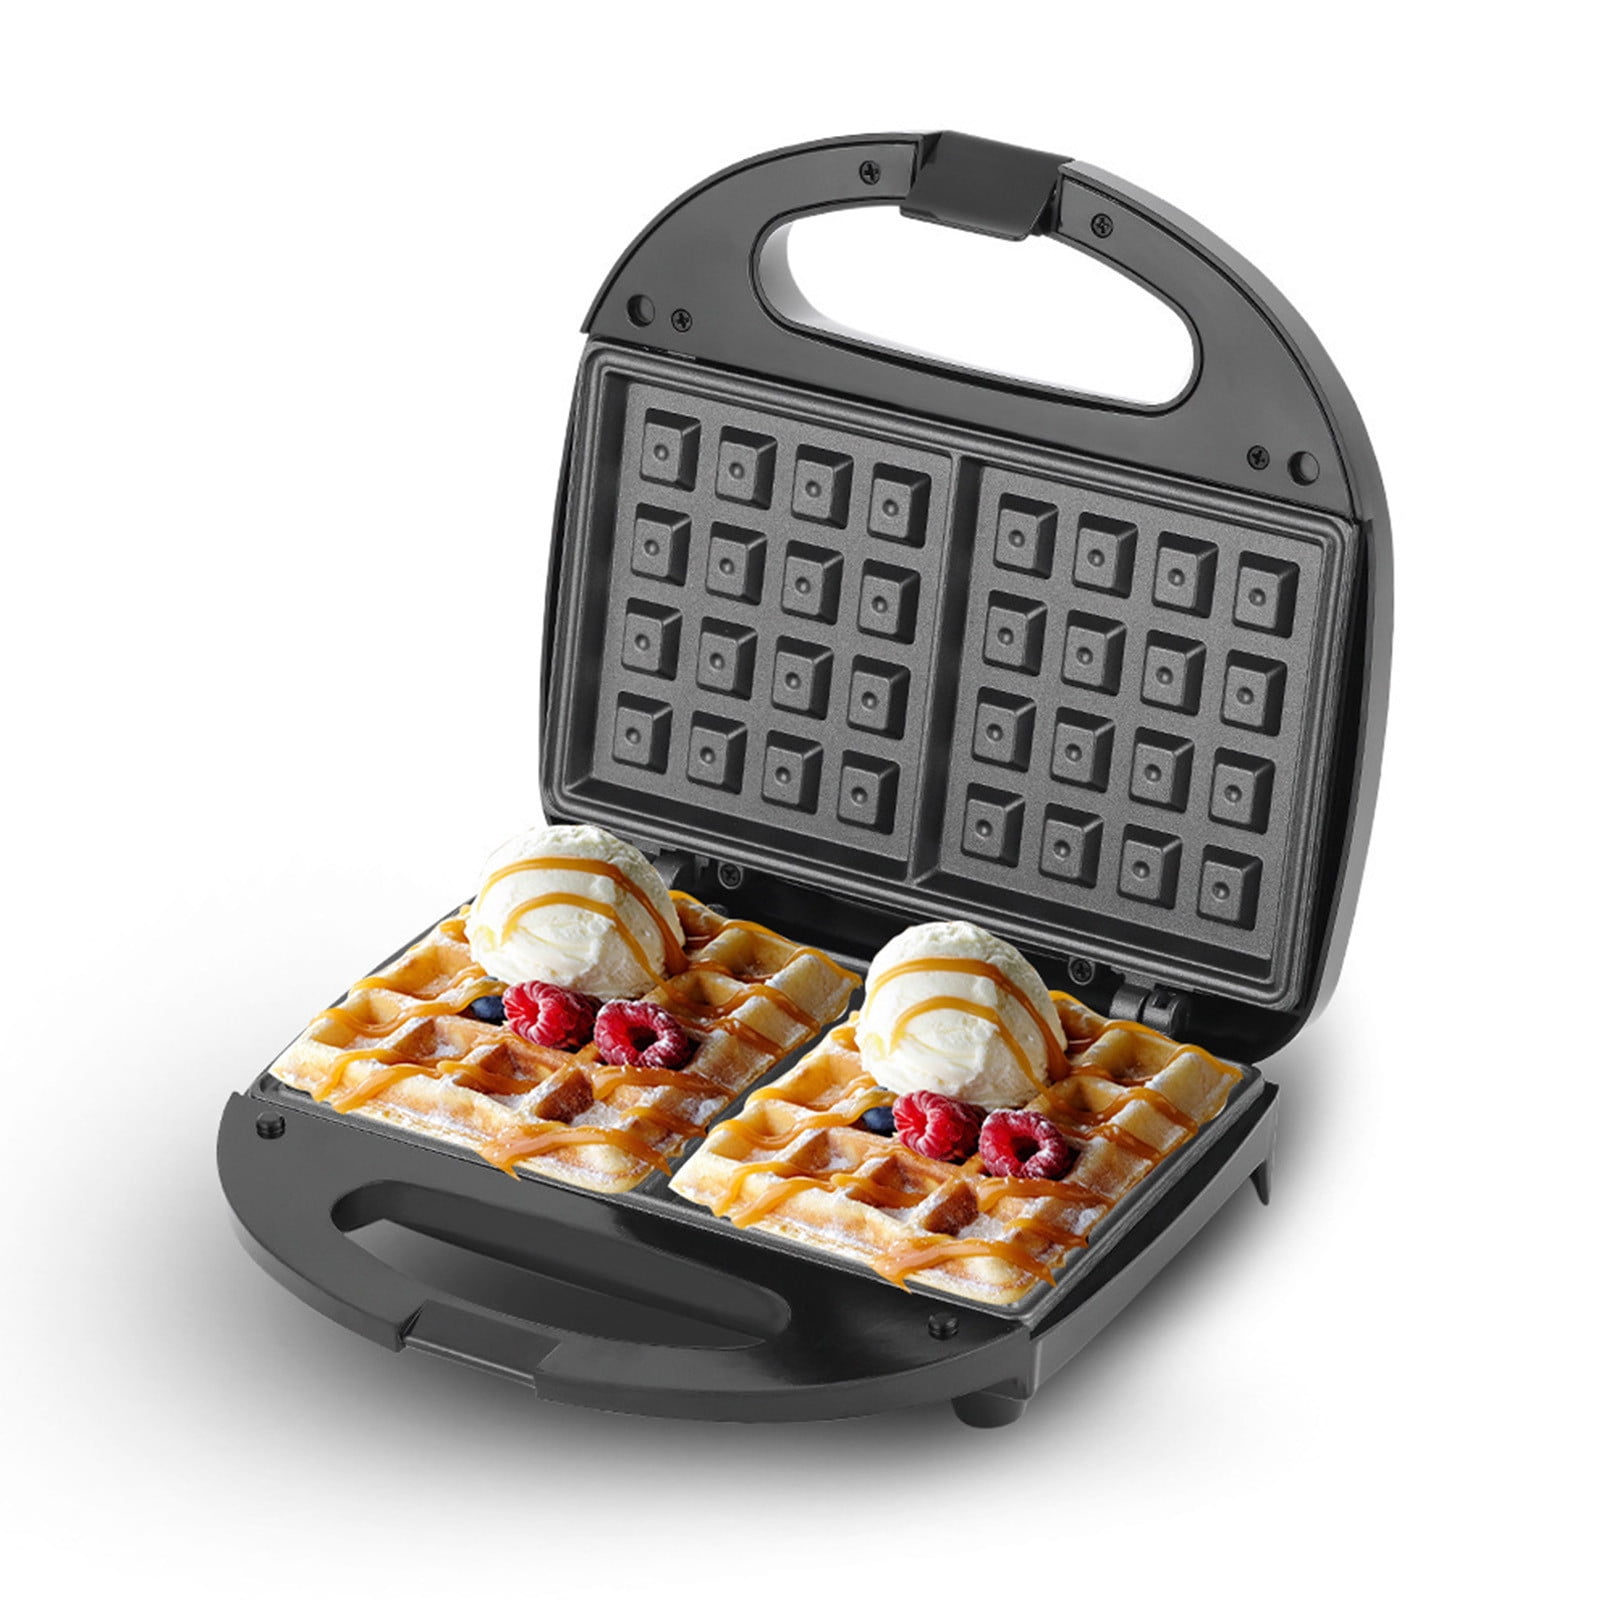  Sandwich Maker, Waffle Iron, multifun 2-in-1 Waffle, Omelet and  Turnover Maker with Non-stick Detachable Plates, LED Indicator Lights, Cool  Touch Handle, Anti-Skid Feet, Easy to Clean: Home & Kitchen